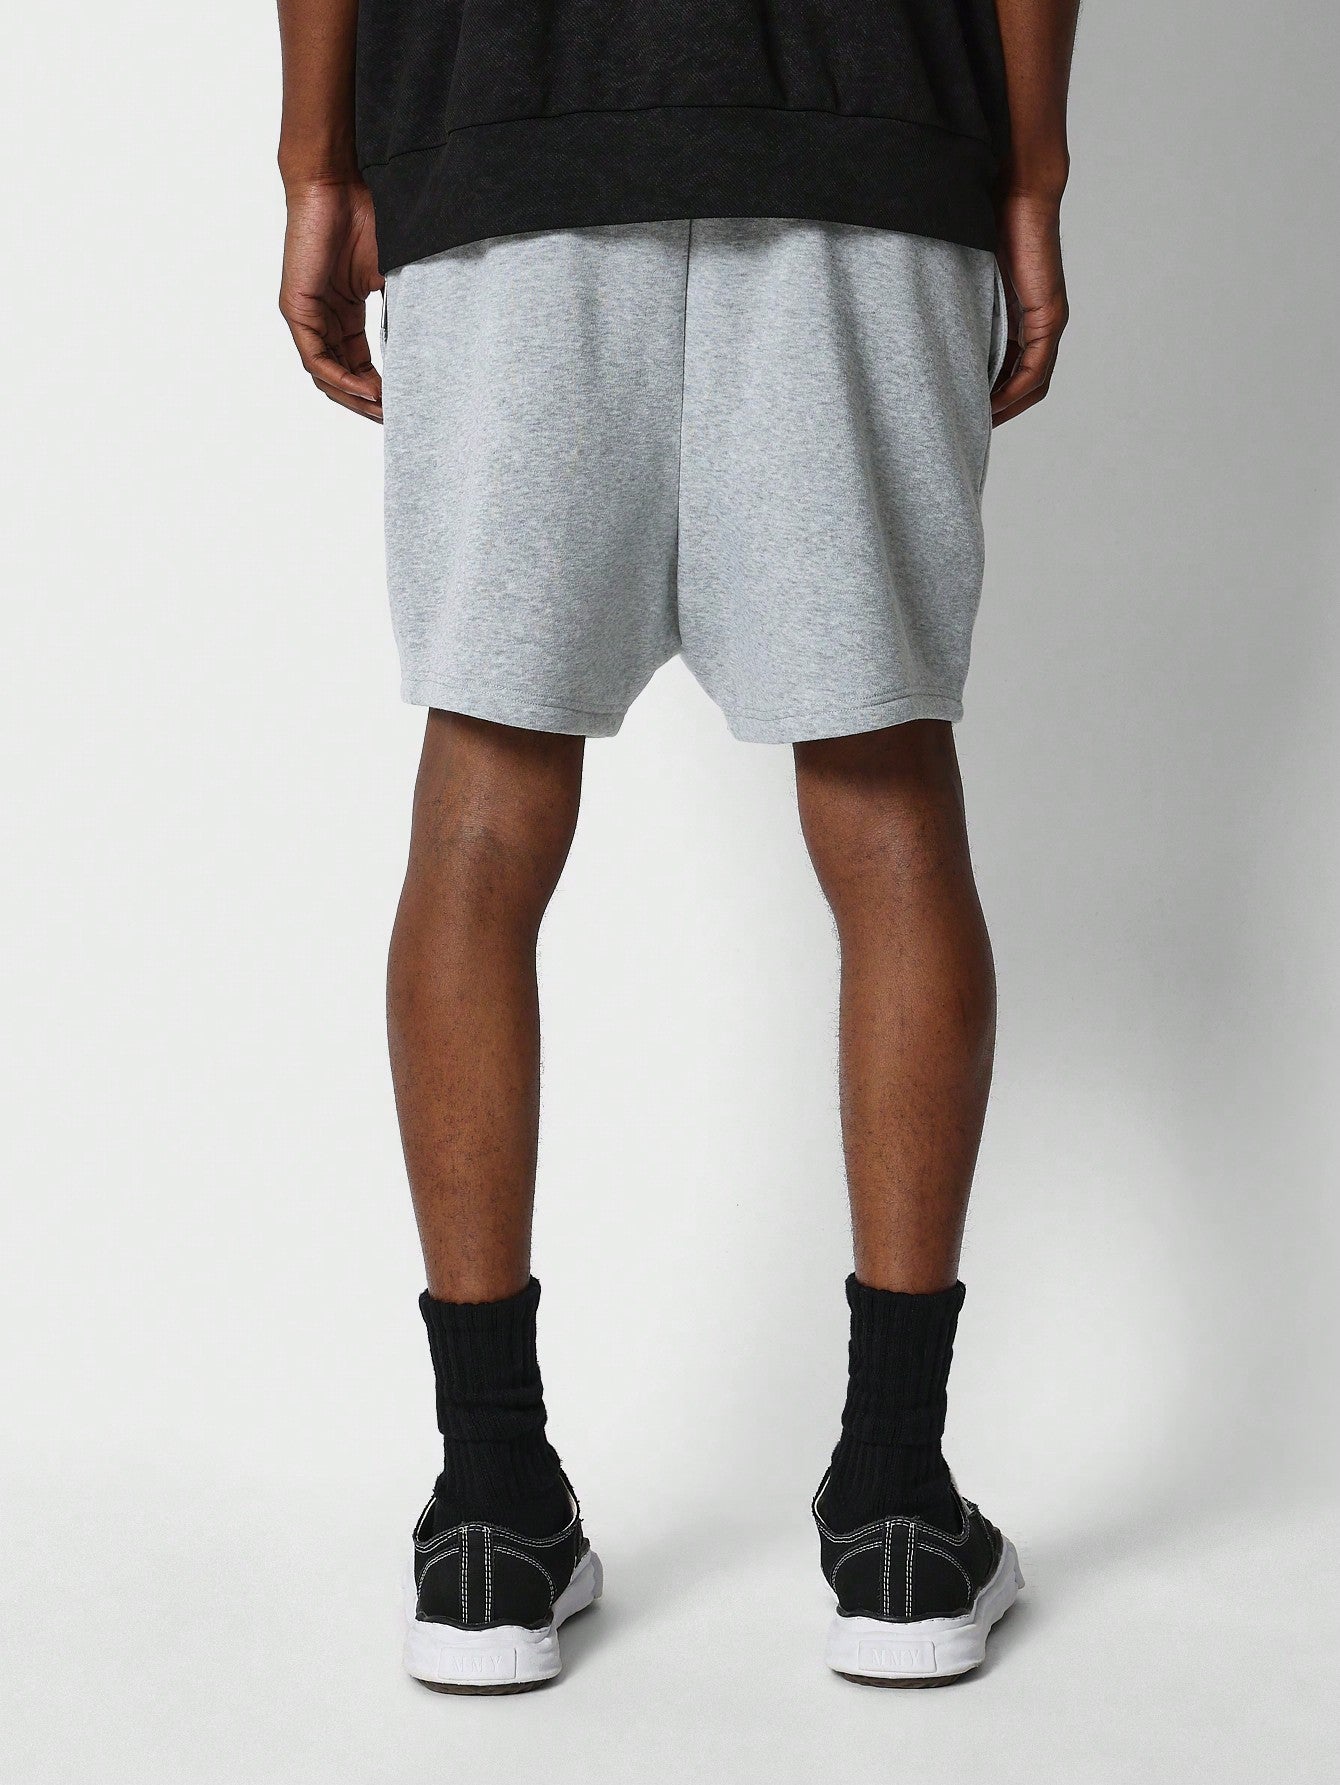 Drop Crotch Shorts With Year Graphic